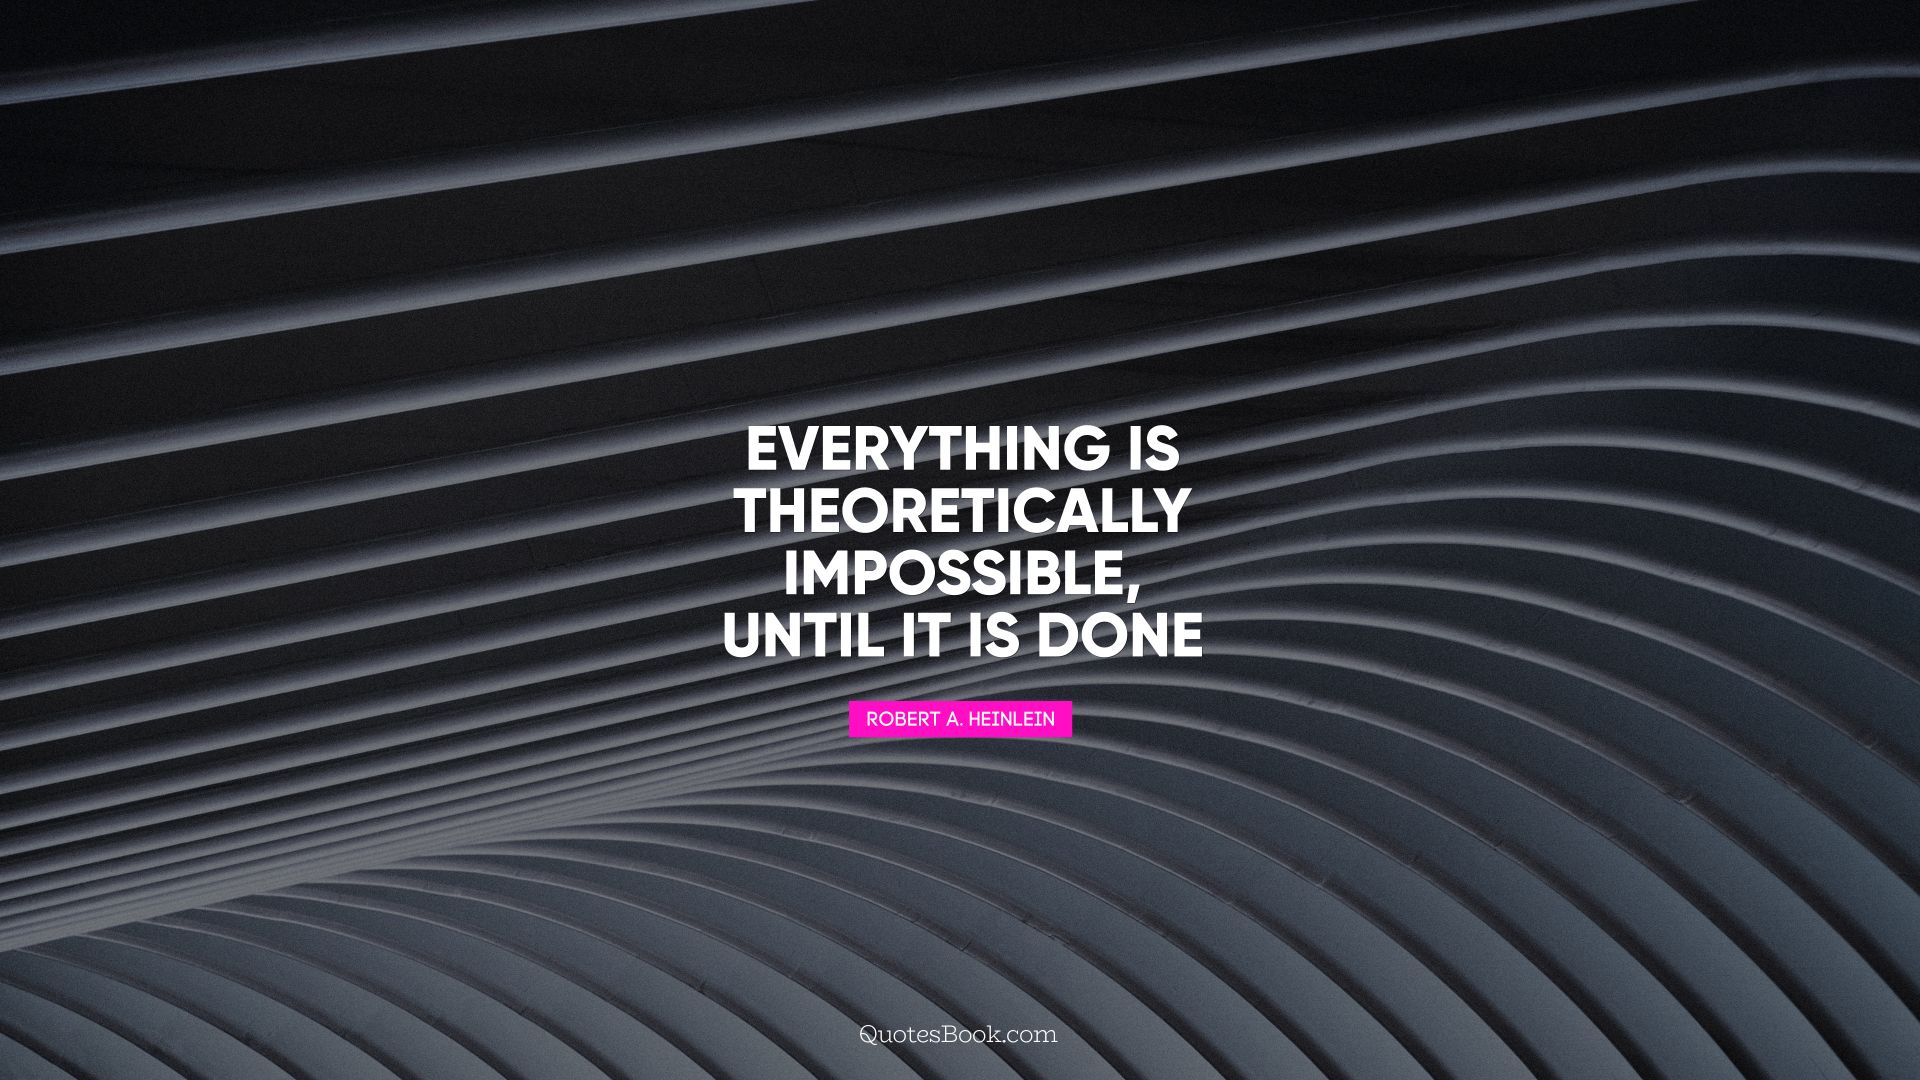 Everything is theoretically impossible, until it is done. - Quote by Robert A. Heinlein